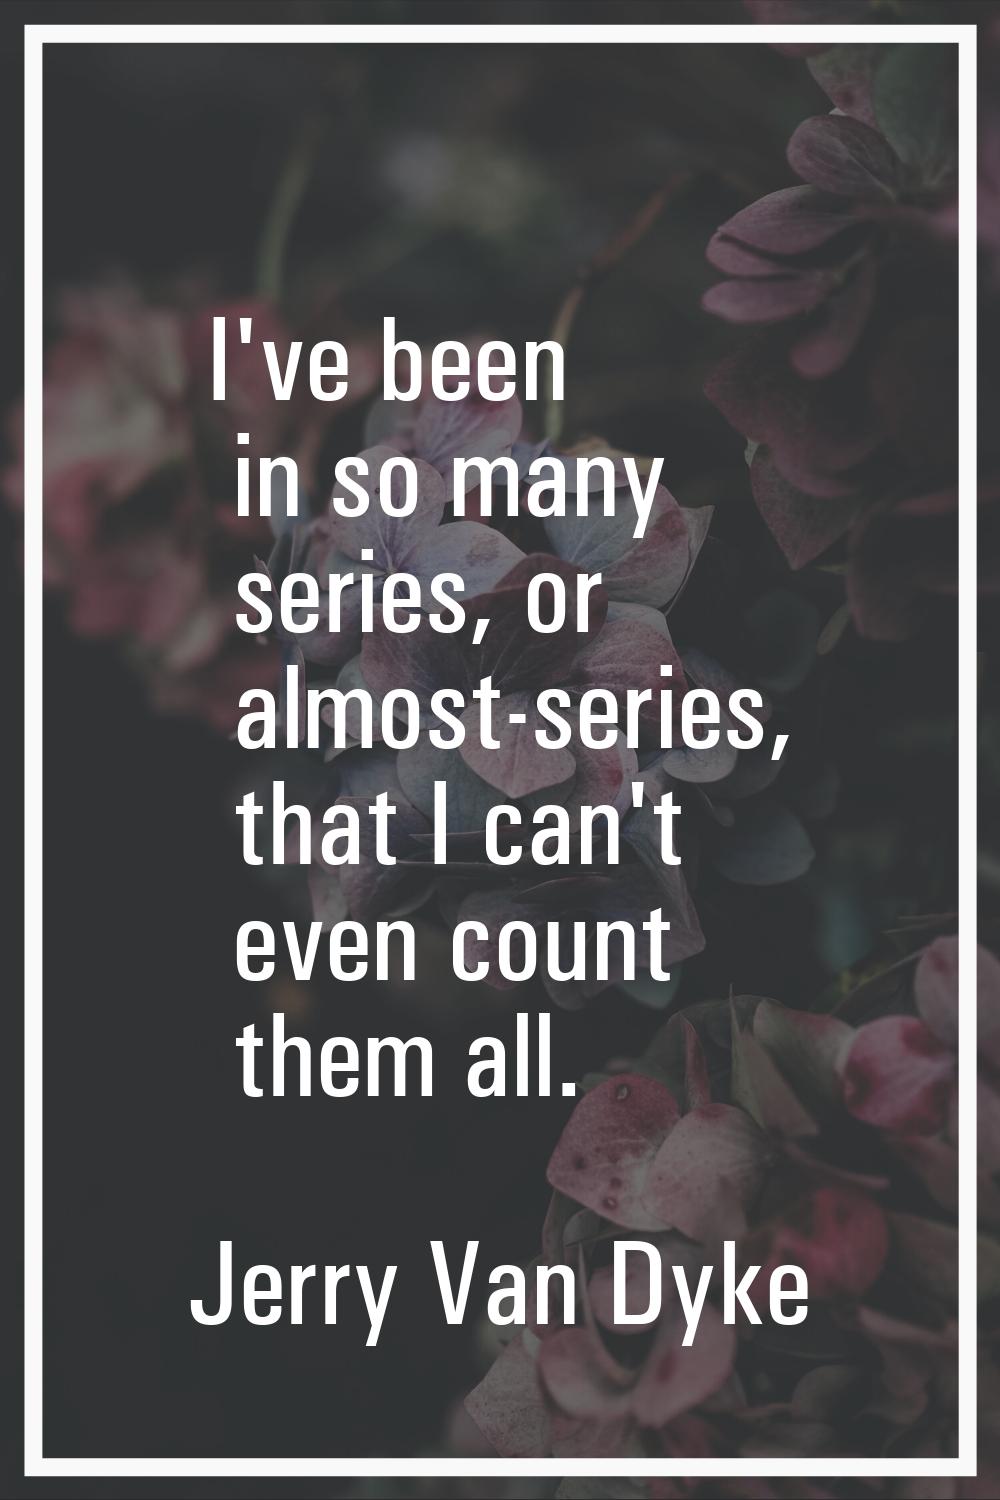 I've been in so many series, or almost-series, that I can't even count them all.